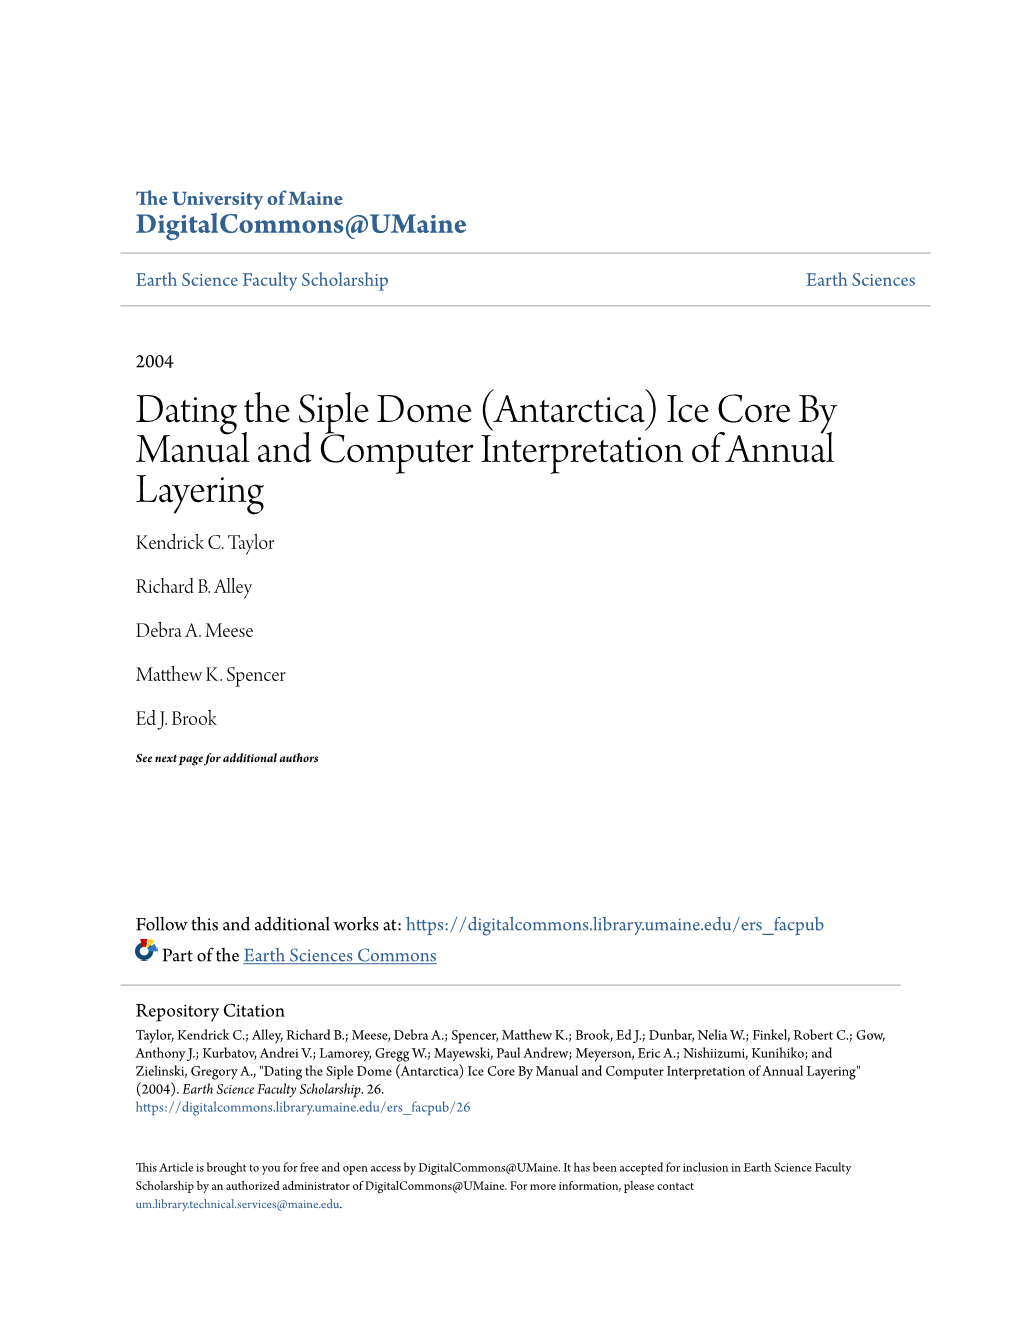 Dating the Siple Dome (Antarctica) Ice Core by Manual and Computer Interpretation of Annual Layering Kendrick C